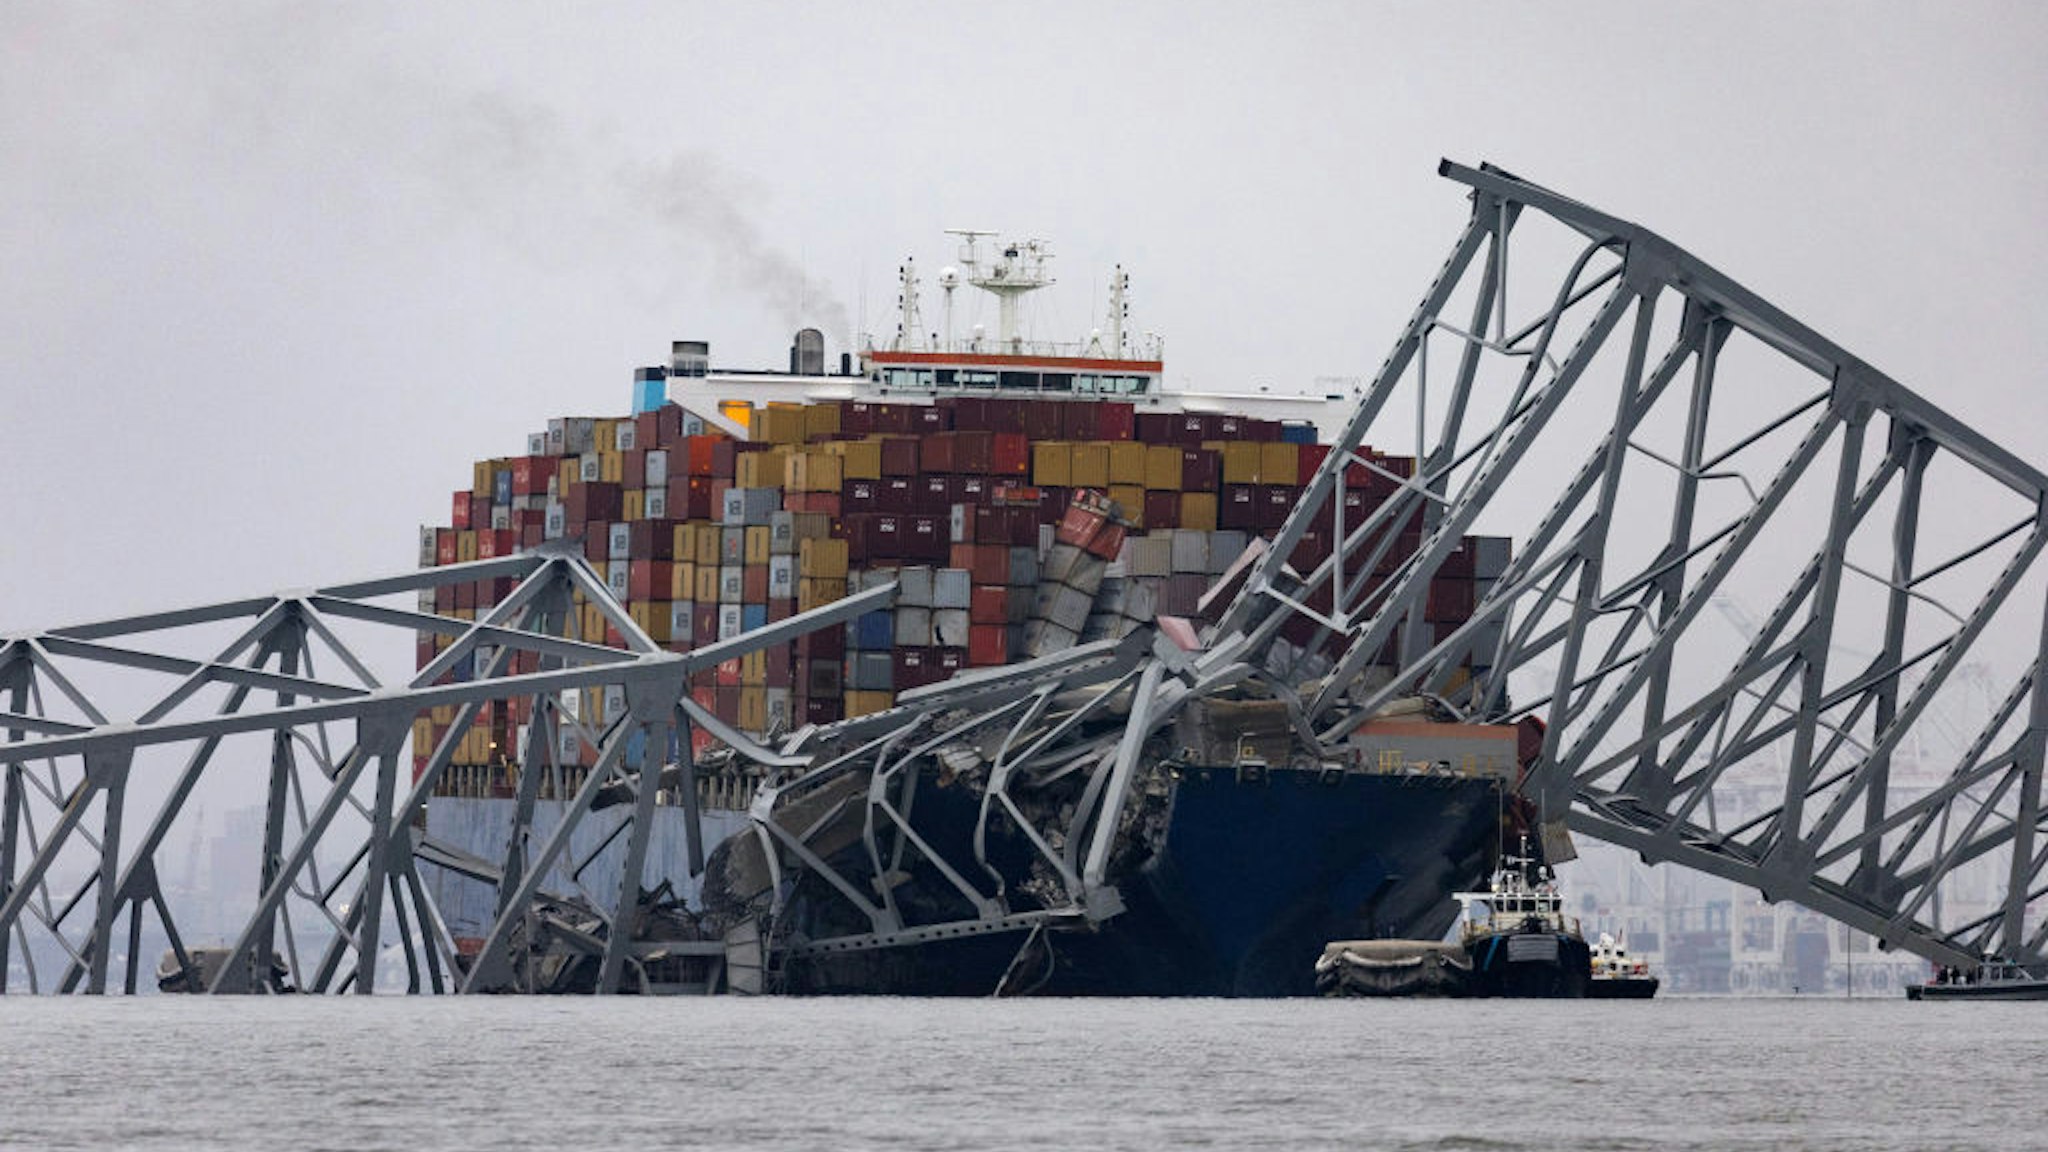 BALTIMORE, MARYLAND - MARCH 27: Workers continue to investigate and search for victims after the cargo ship Dali collided with the Francis Scott Key Bridge causing it to collapse yesterday, on March 27, 2024 in Baltimore, Maryland. Two survivors were pulled from the Patapsco River and six missing people are presumed dead after the Coast Guard called off rescue efforts. A work crew was fixing potholes on the bridge, which is used by roughly 30,000 people each day, when the ship struck at around 1:30am on Tuesday morning. The accident has temporarily closed the Port of Baltimore, one of the largest and busiest on the East Coast of the U.S. (Photo by Scott Olson/Getty Images)